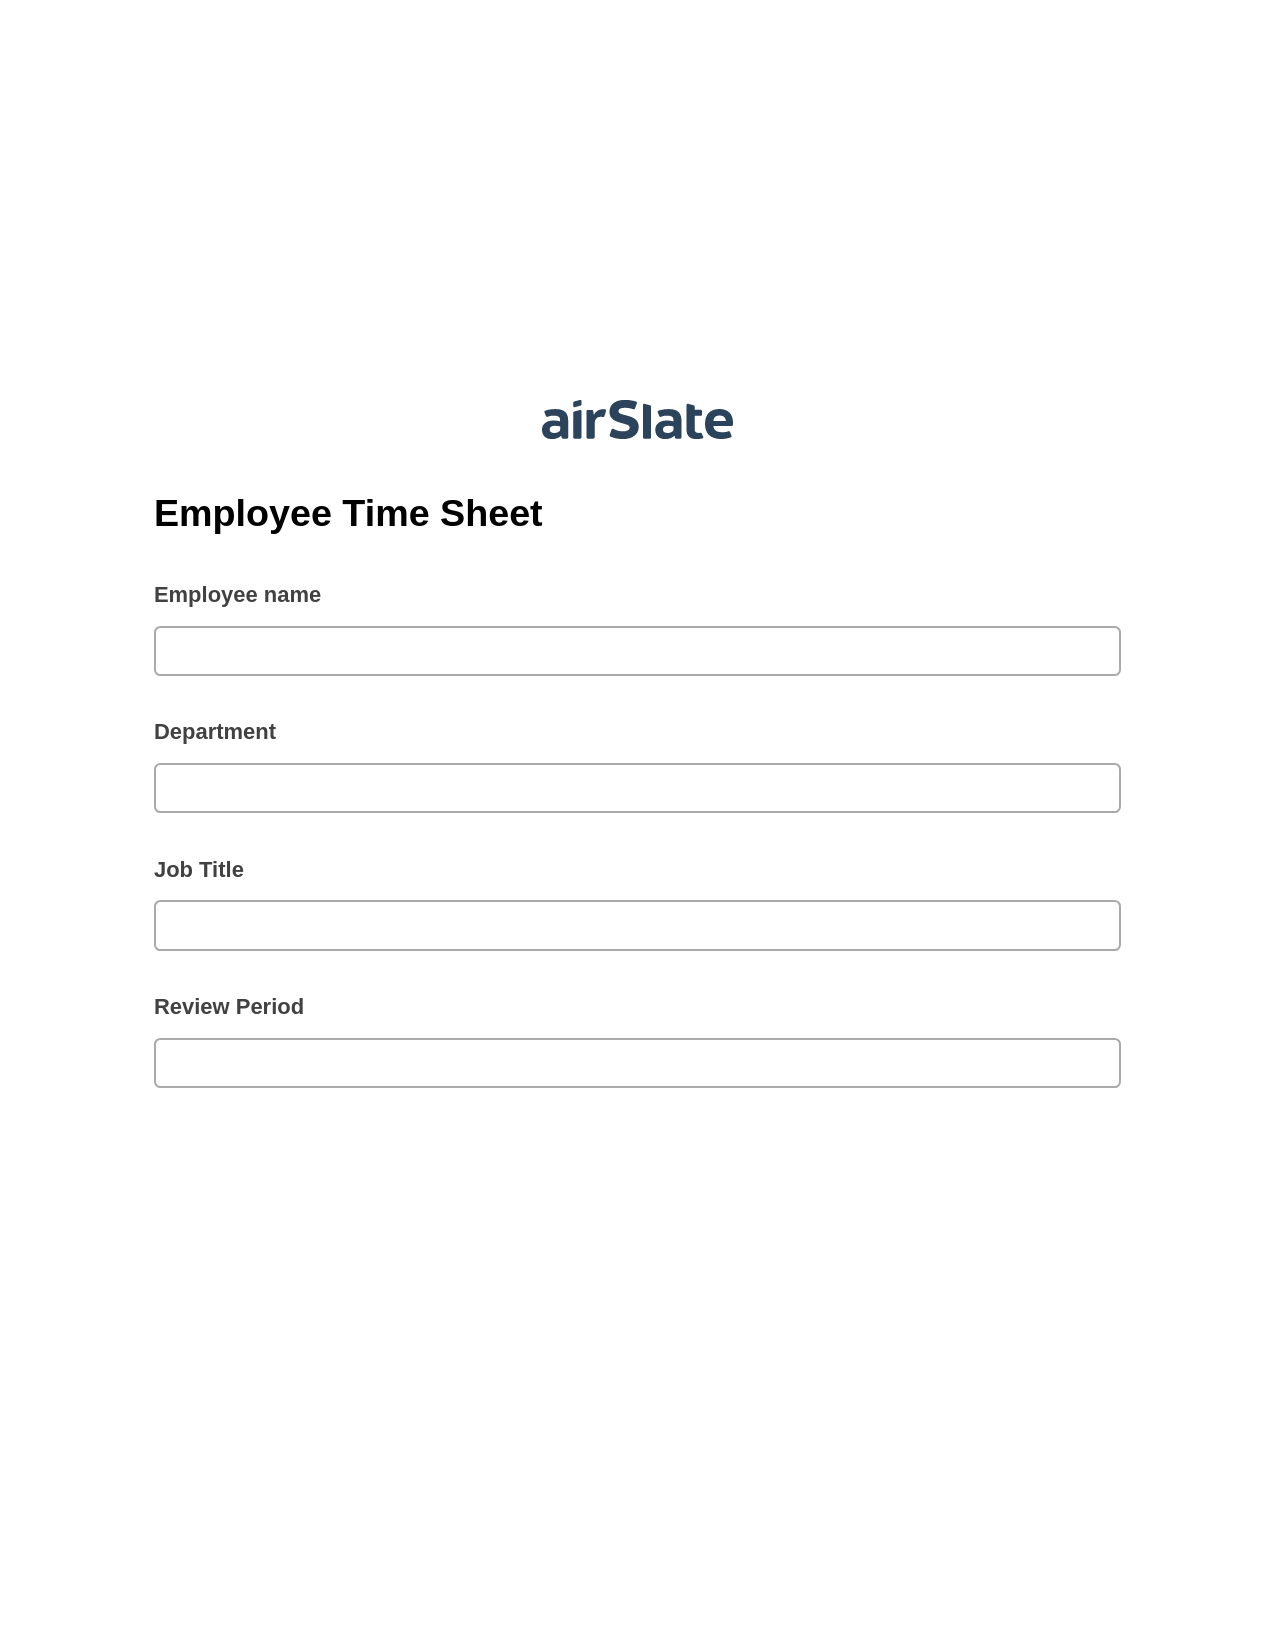 Multirole Employee Time Sheet Pre-fill Document Bot, Create Salesforce Records Bot, Archive to SharePoint Folder Bot